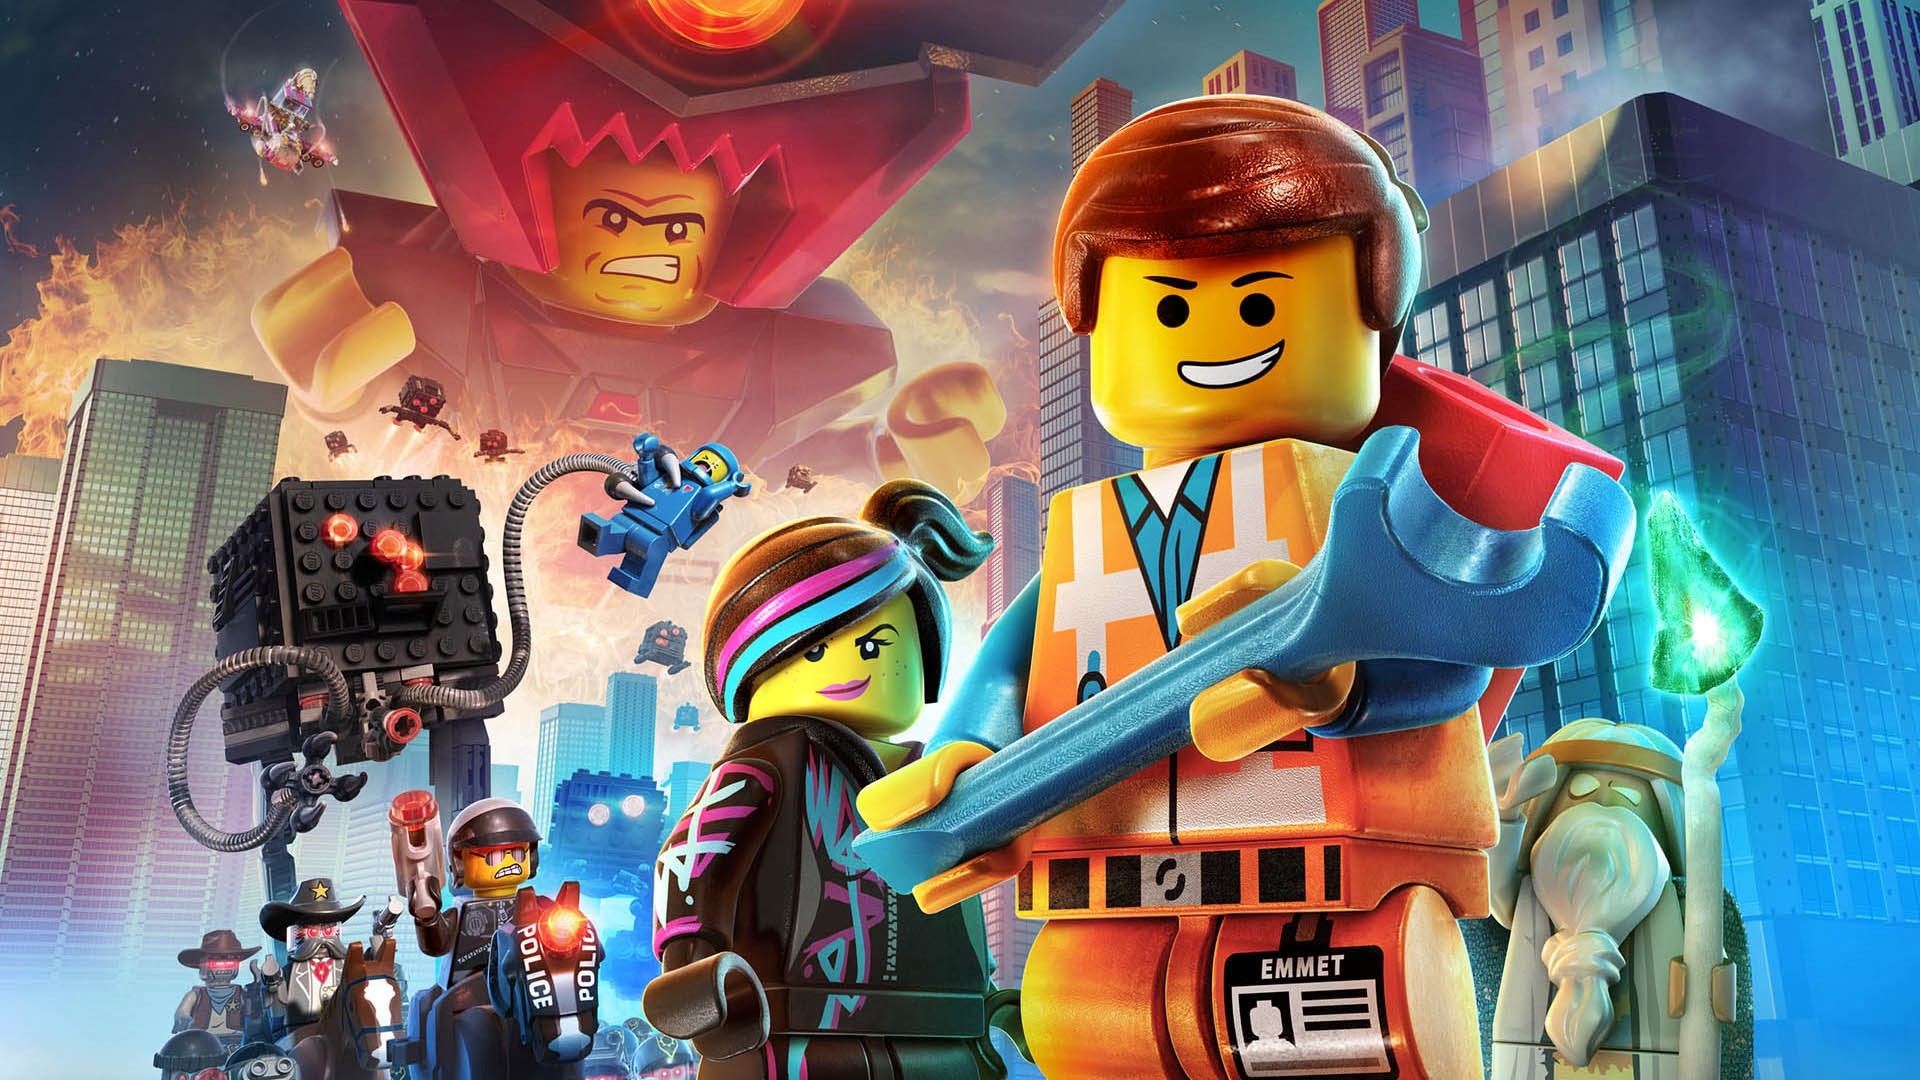 1920x1080 The Lego Movie Movie Wallpapers HD Wallpapers 1920Ã1080